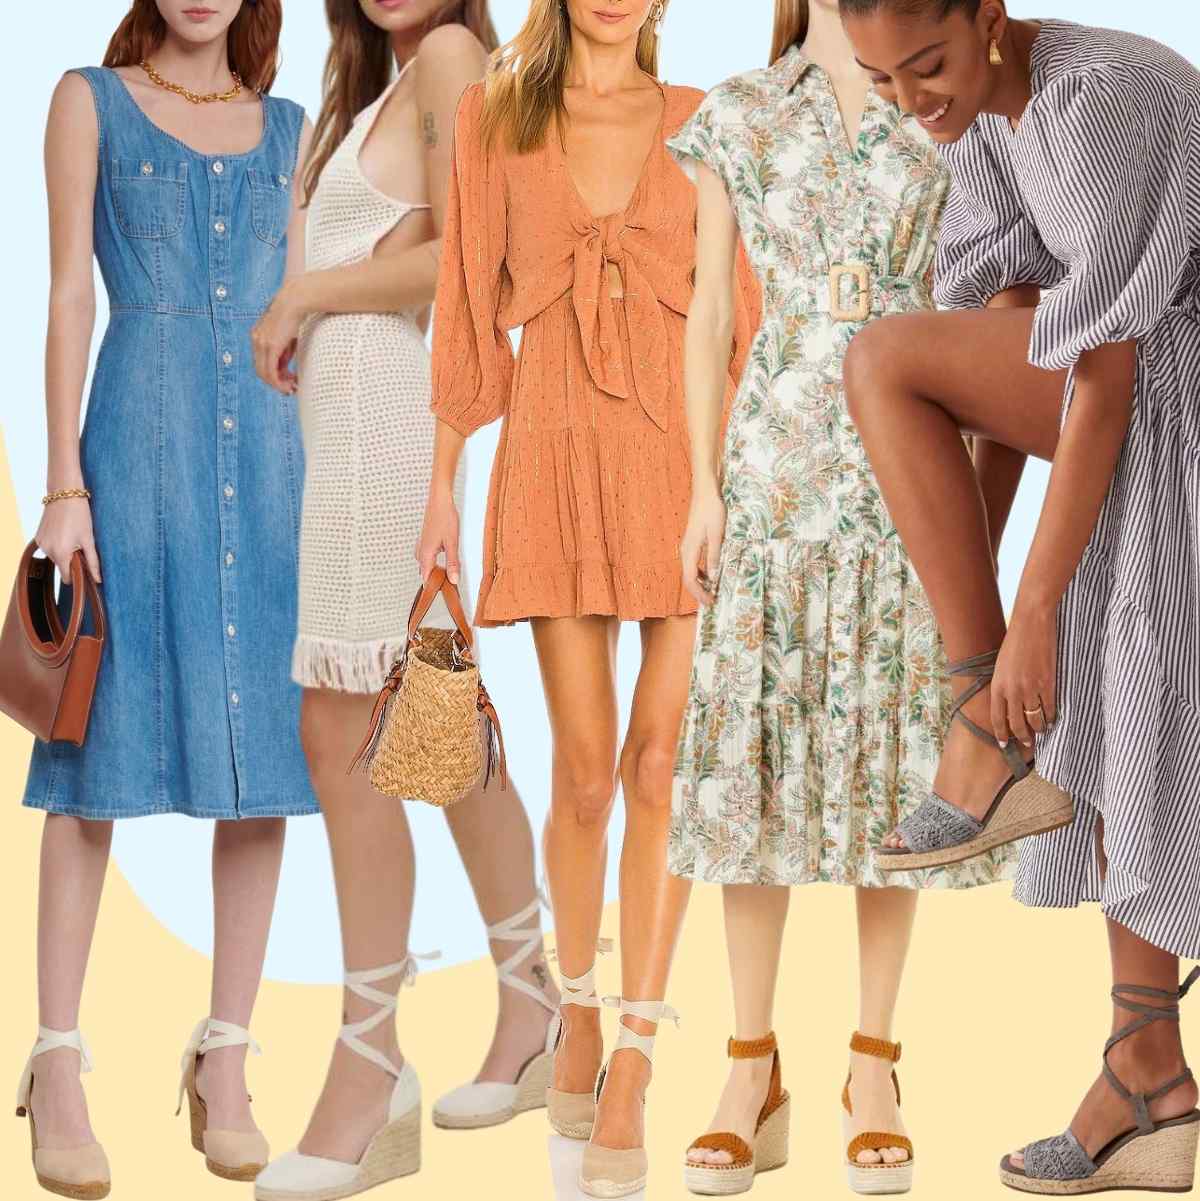 Stylish Shoes to Wear with Dresses in Summer, Winter and Year-Round!